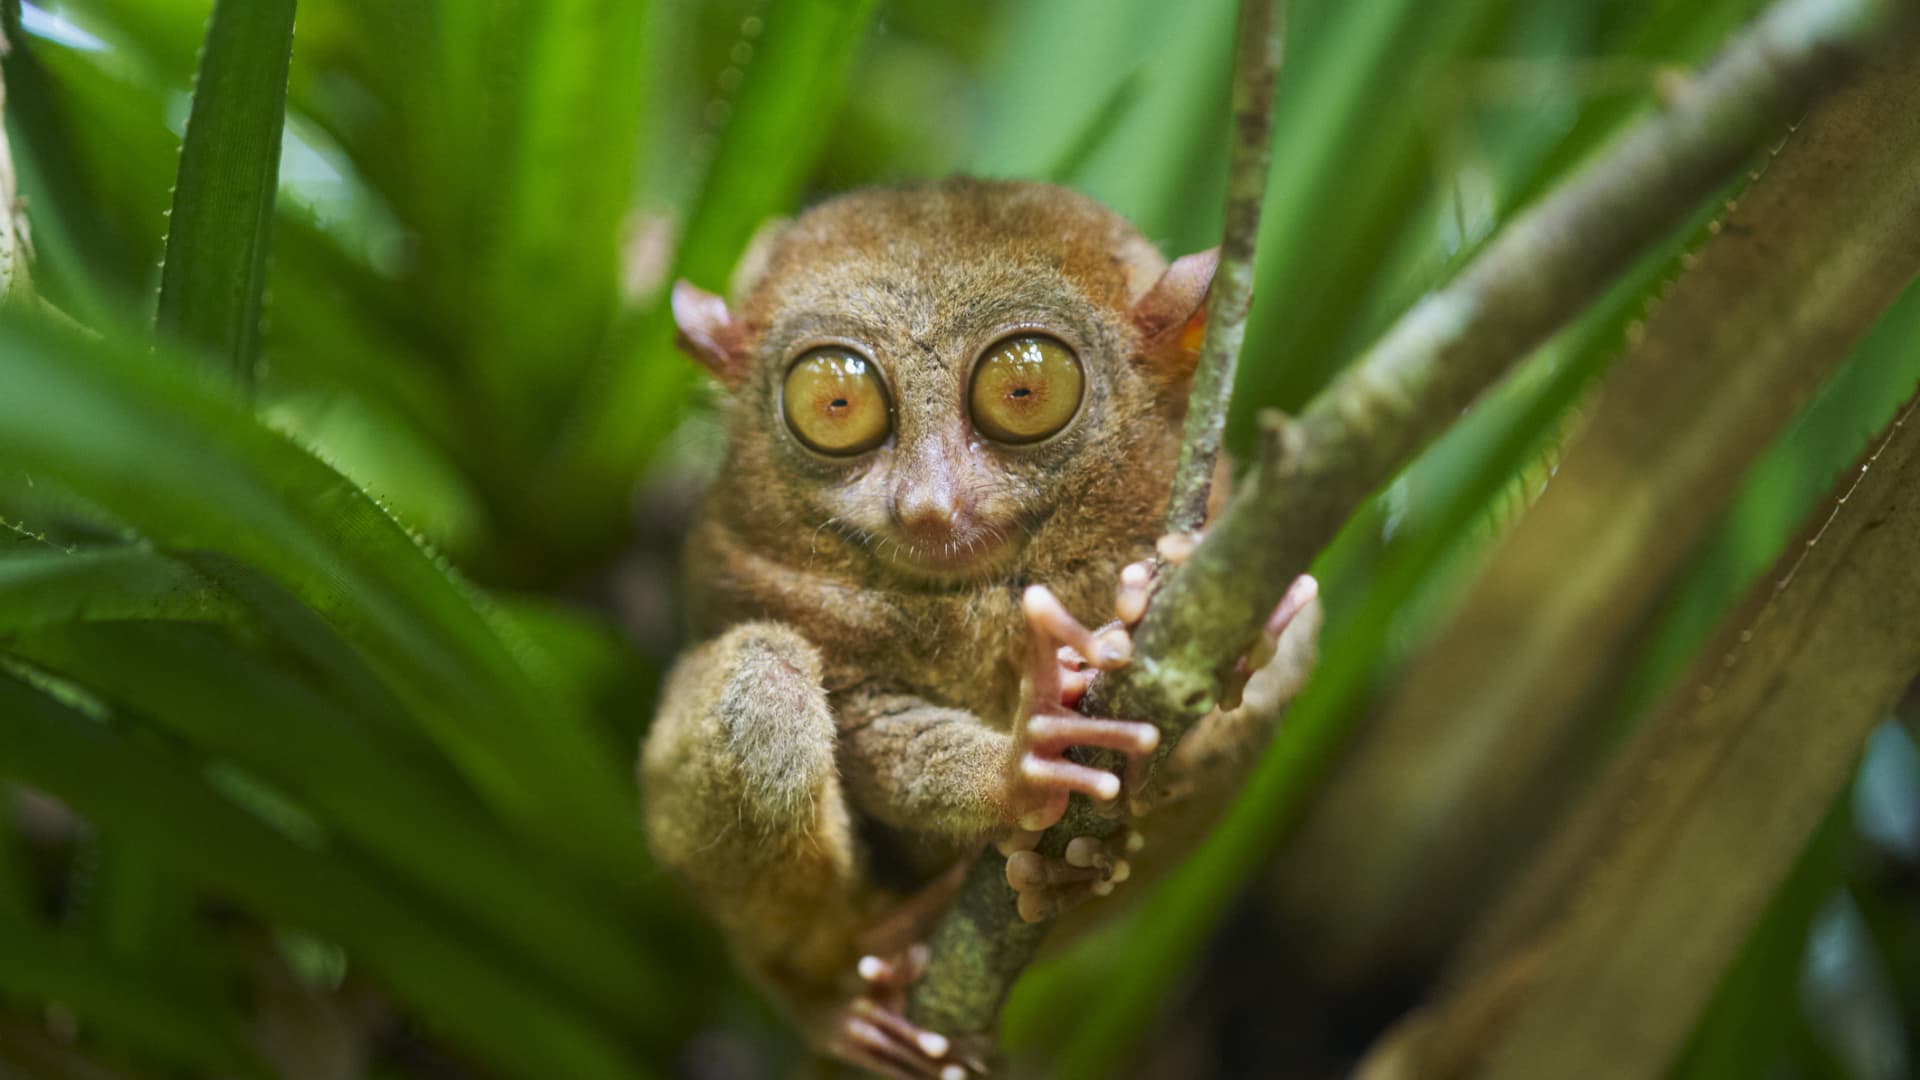 Tarsiers are tiny and can fit inside a human hand, though tourists are cautioned not to touch them.